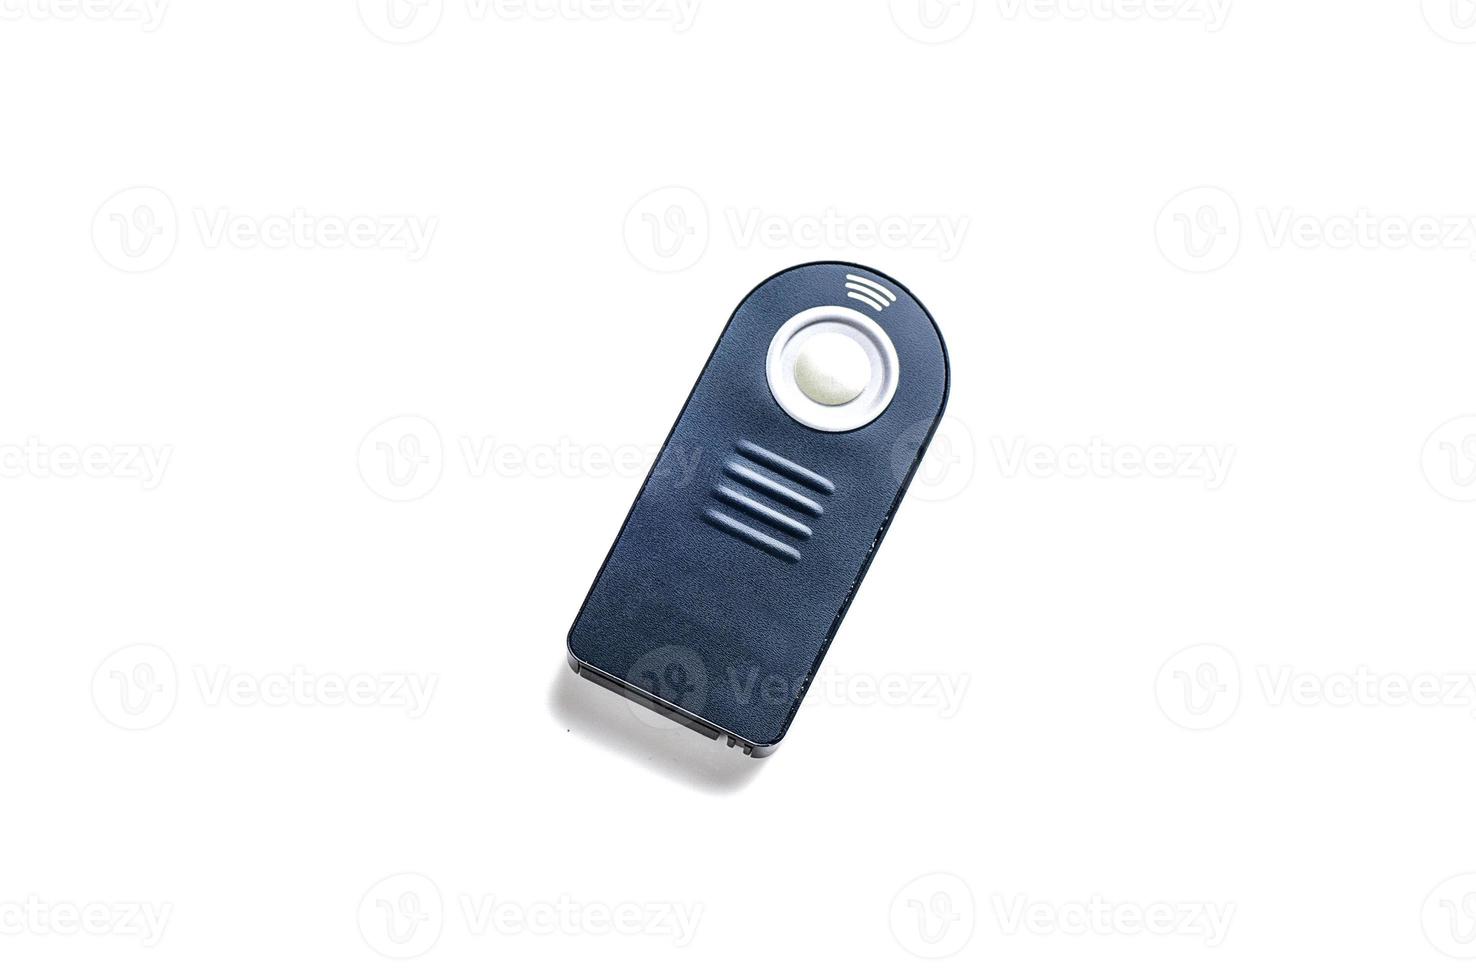 Wireless Remote control for DSLR camera. Isolated on white background photo